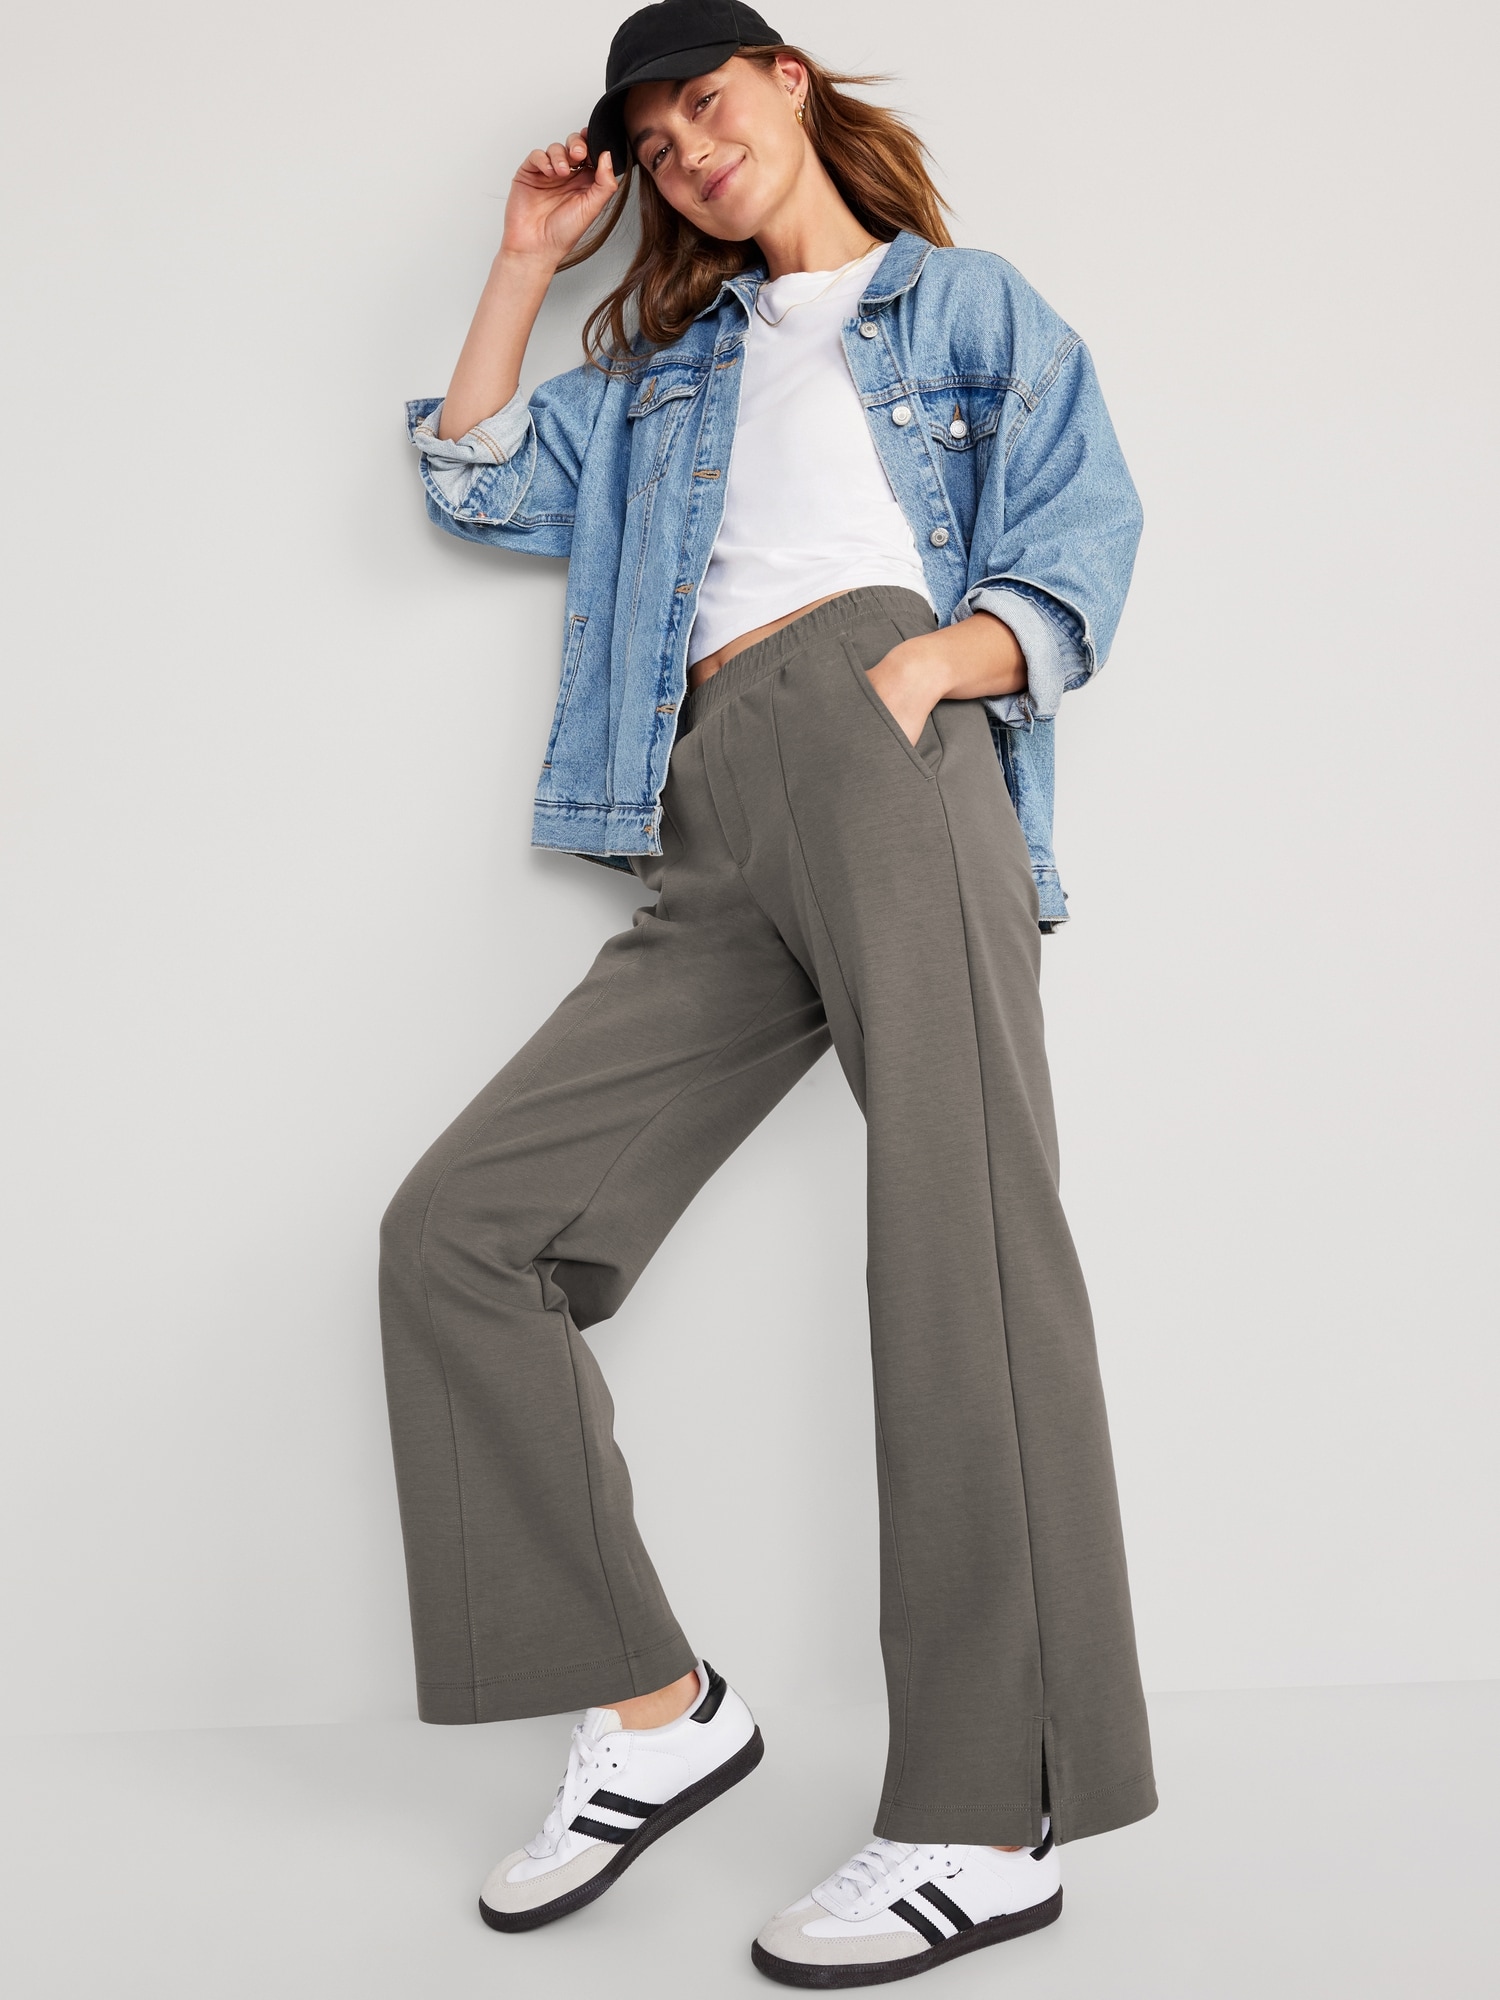 Old Navy Women's Wide Leg Pants On Sale Up To 90% Off Retail